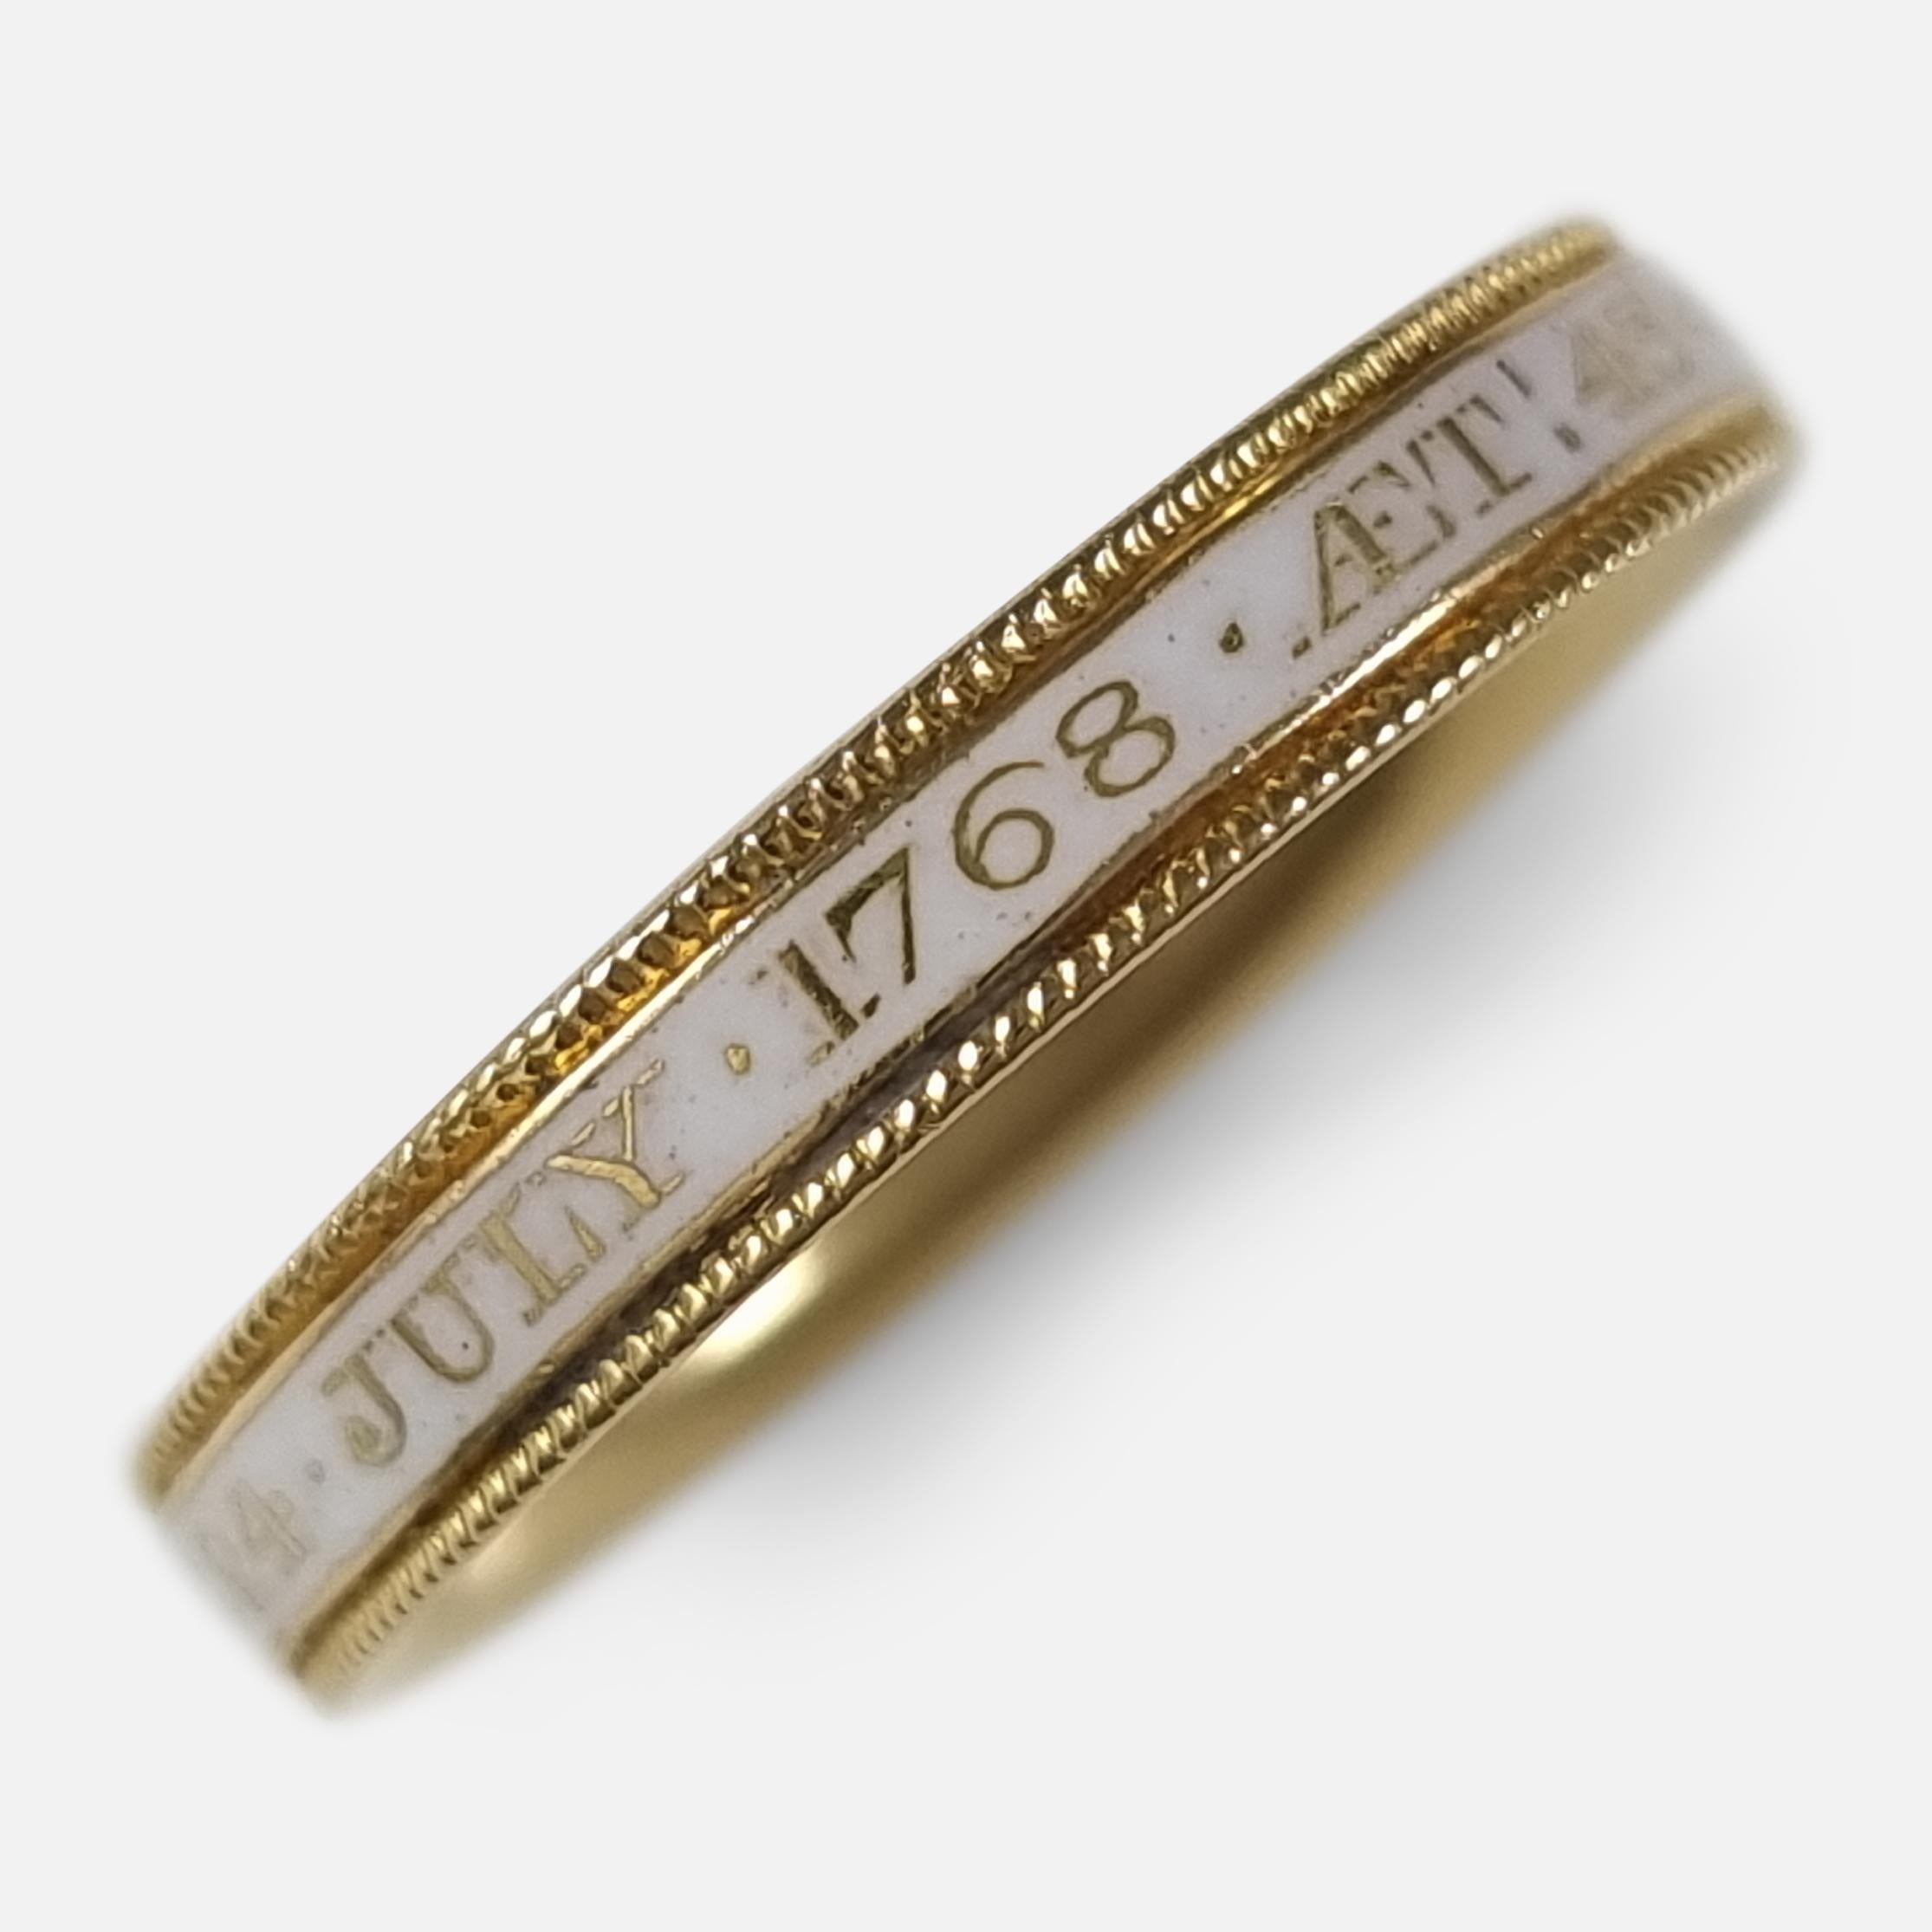 A George III 18ct yellow gold and white enamel memorial mourning band ring.

The ring bears the inscription 